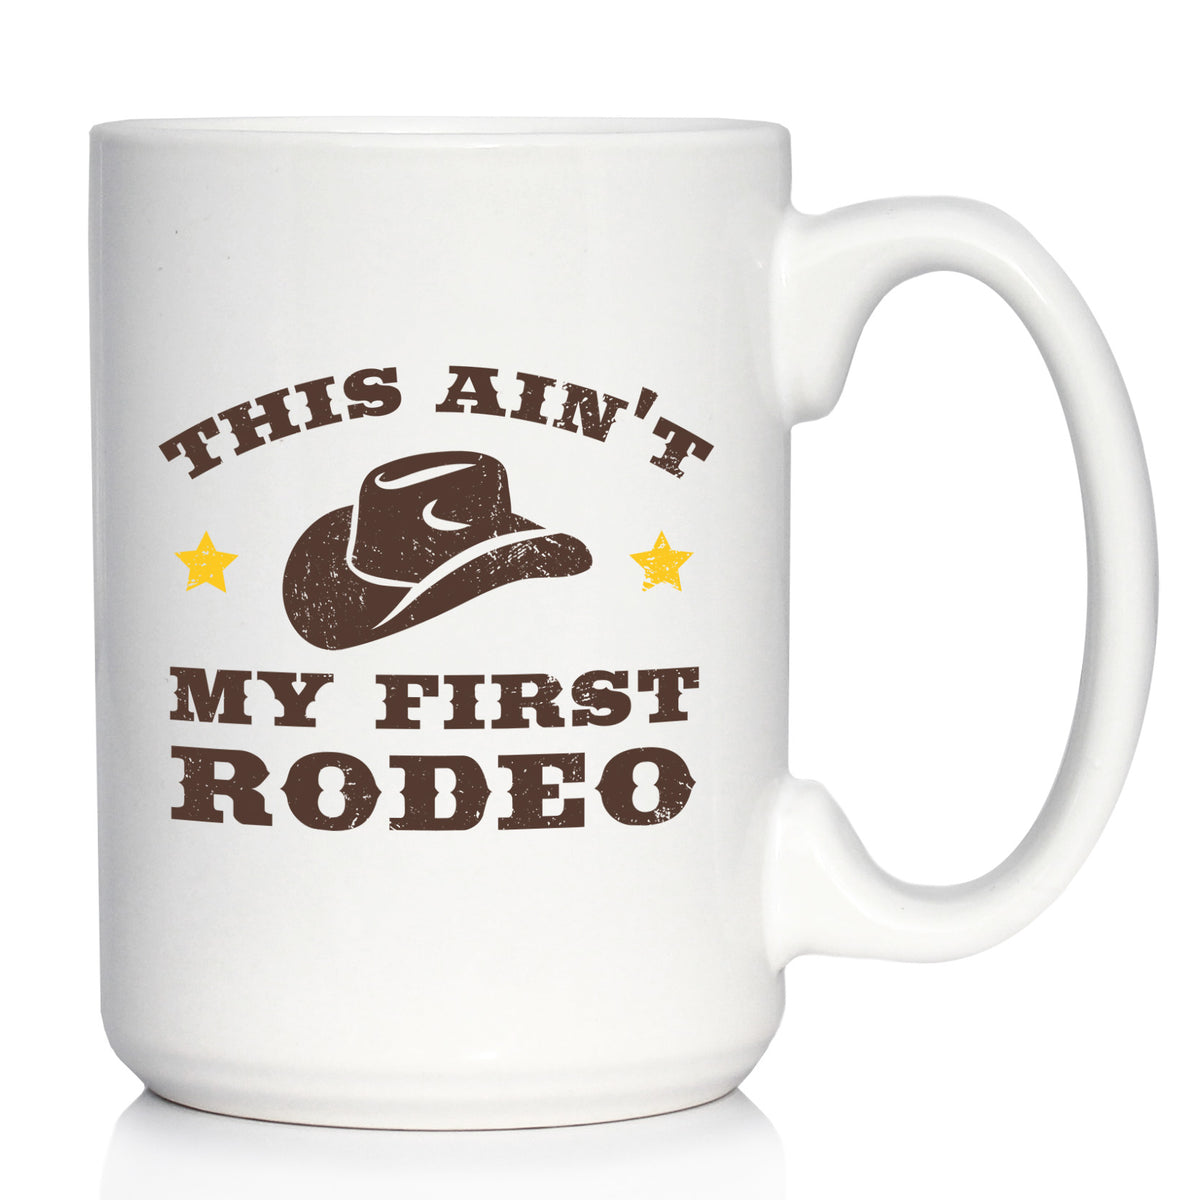 Ain&#39;t My First Rodeo Coffee Mug - Funny Cowboy or Cowgirl Gifts for Men &amp; Women - Fun Unique Party Decor Cup